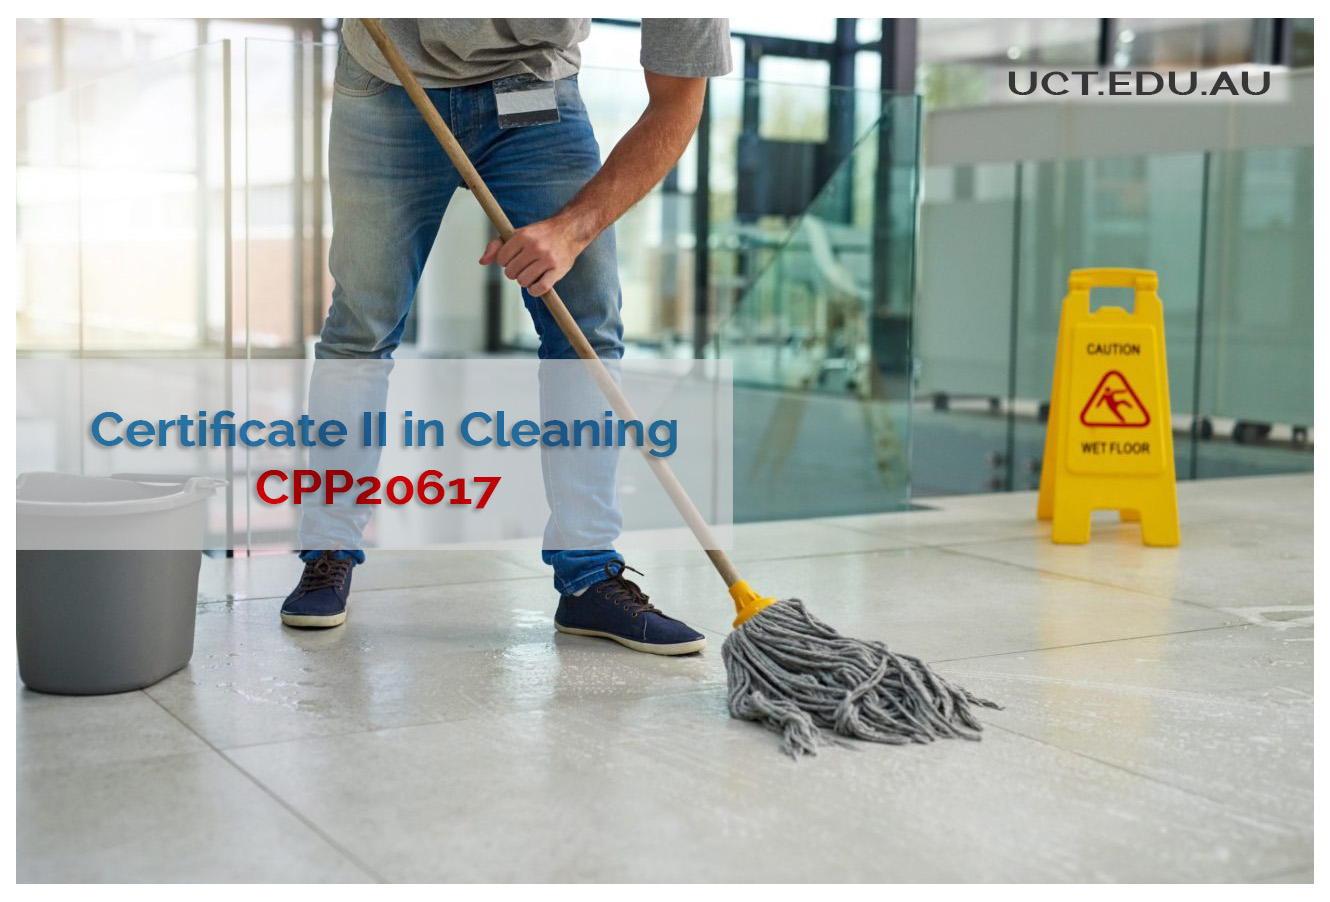 CPP20617 – Certificate II in Cleaning